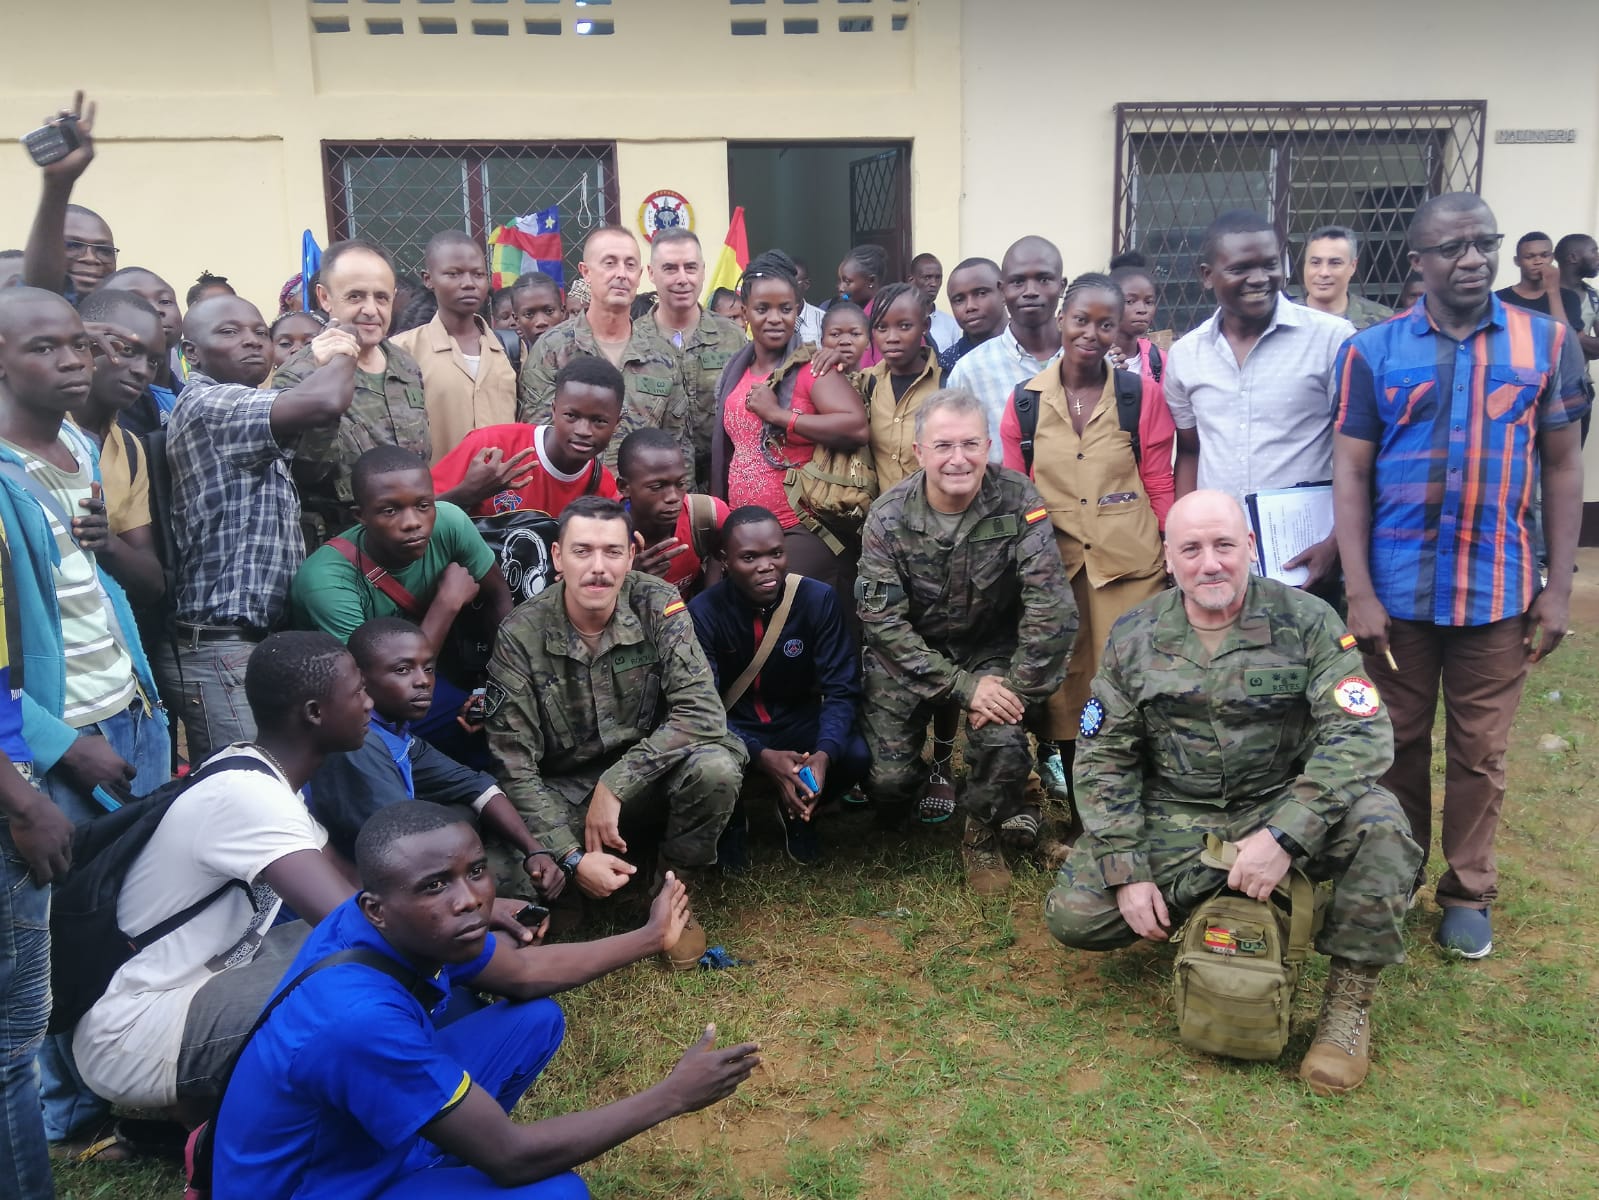 Spanish soldiers inaugurate a classroom at the Vocational Training Centre of Bangui